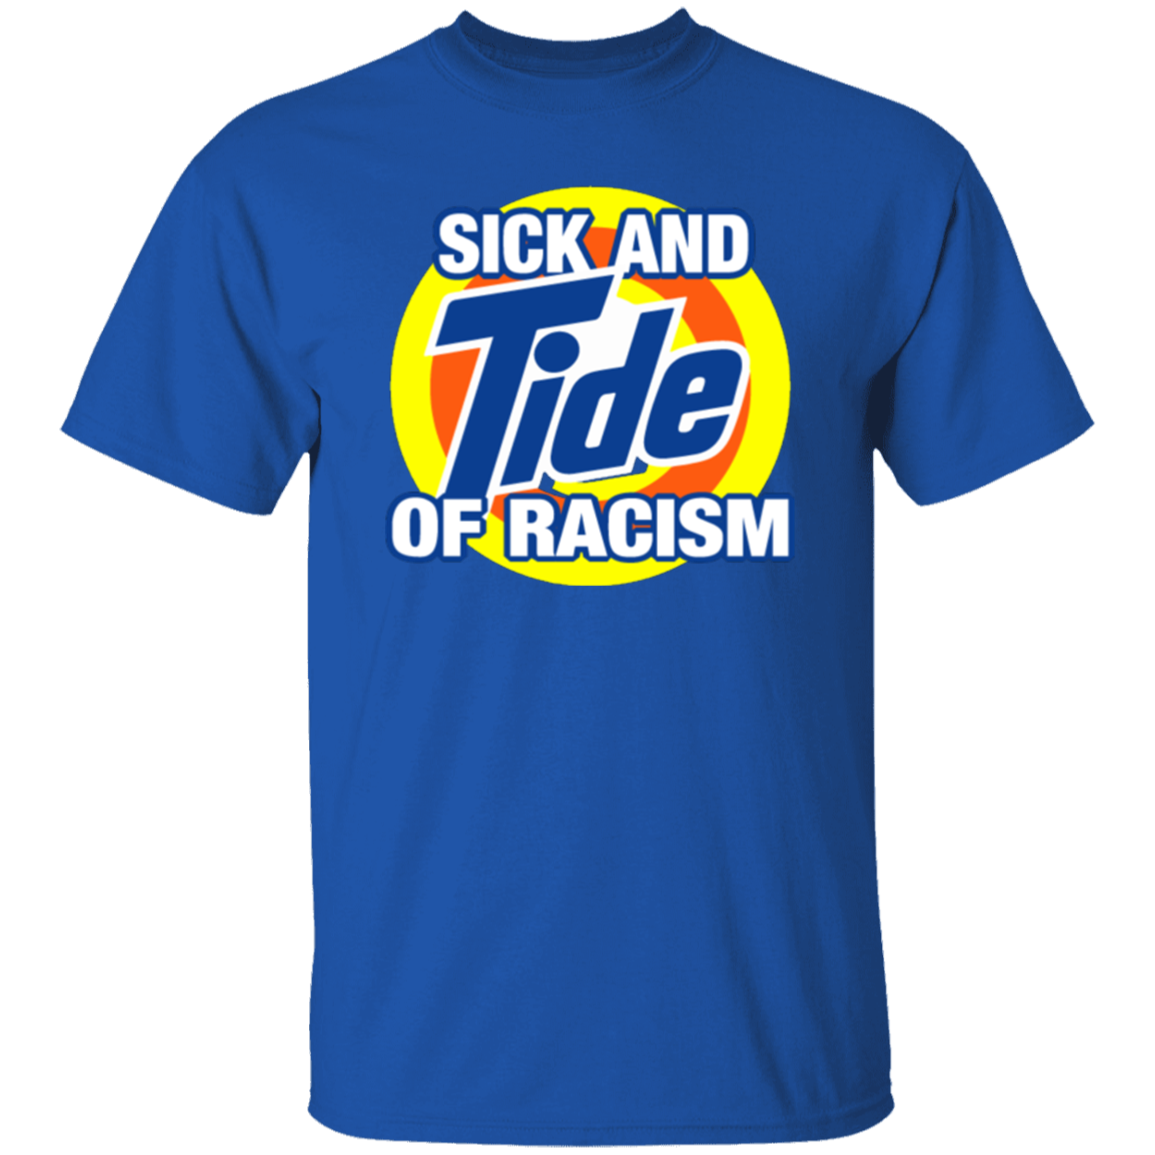 Tide of Racism -  T-Shirt